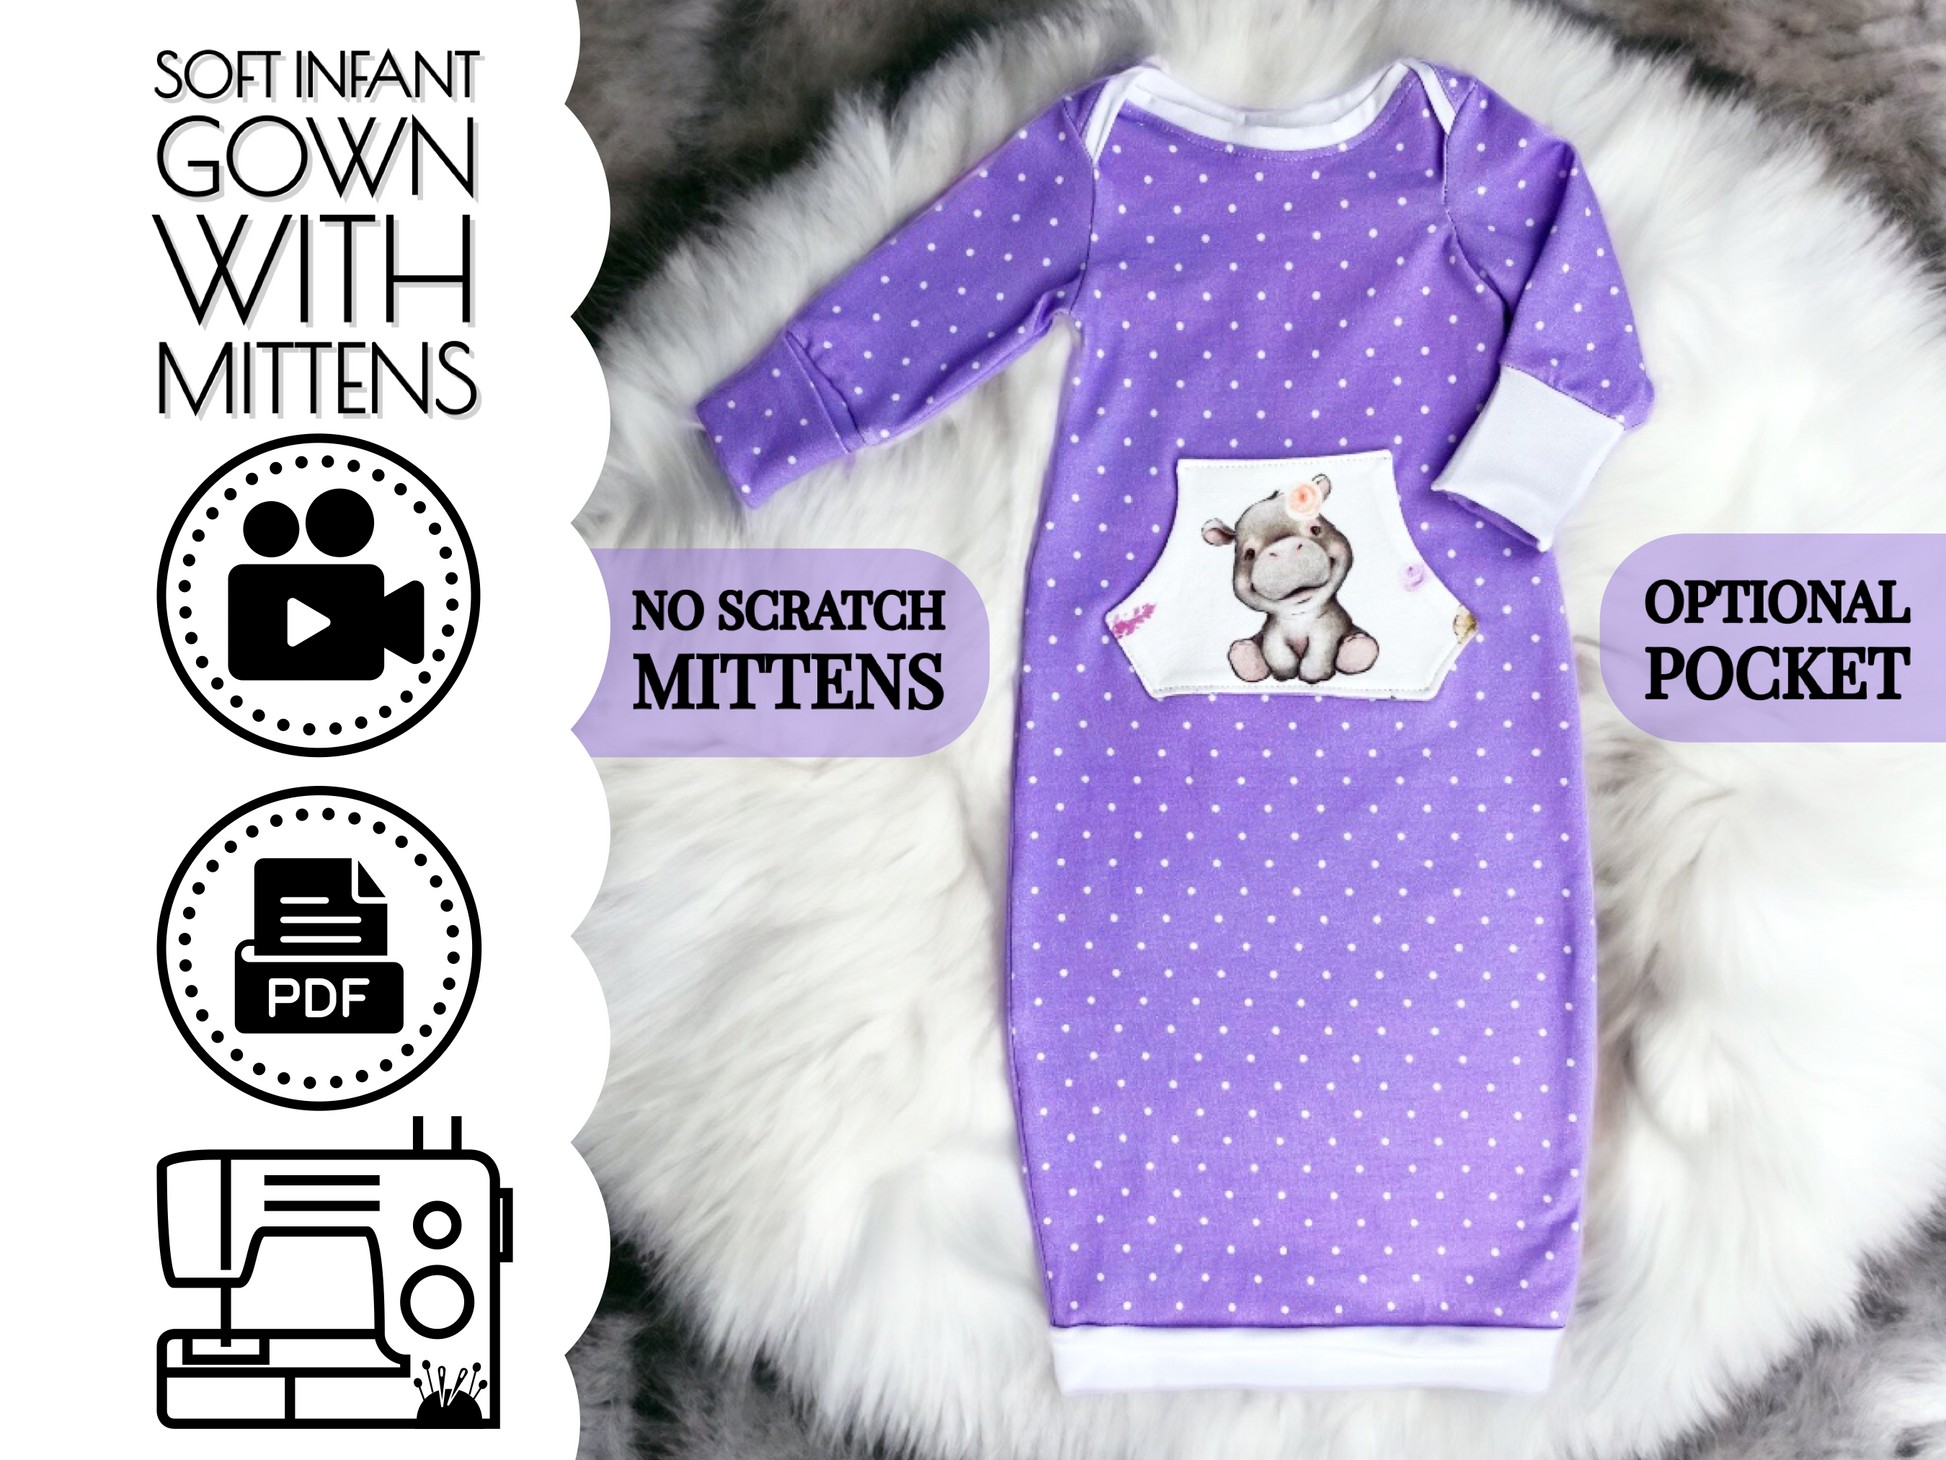 newborn baby gown sewing pattern with no scratch mittens, pdf printable aloha sewing company tutorial video